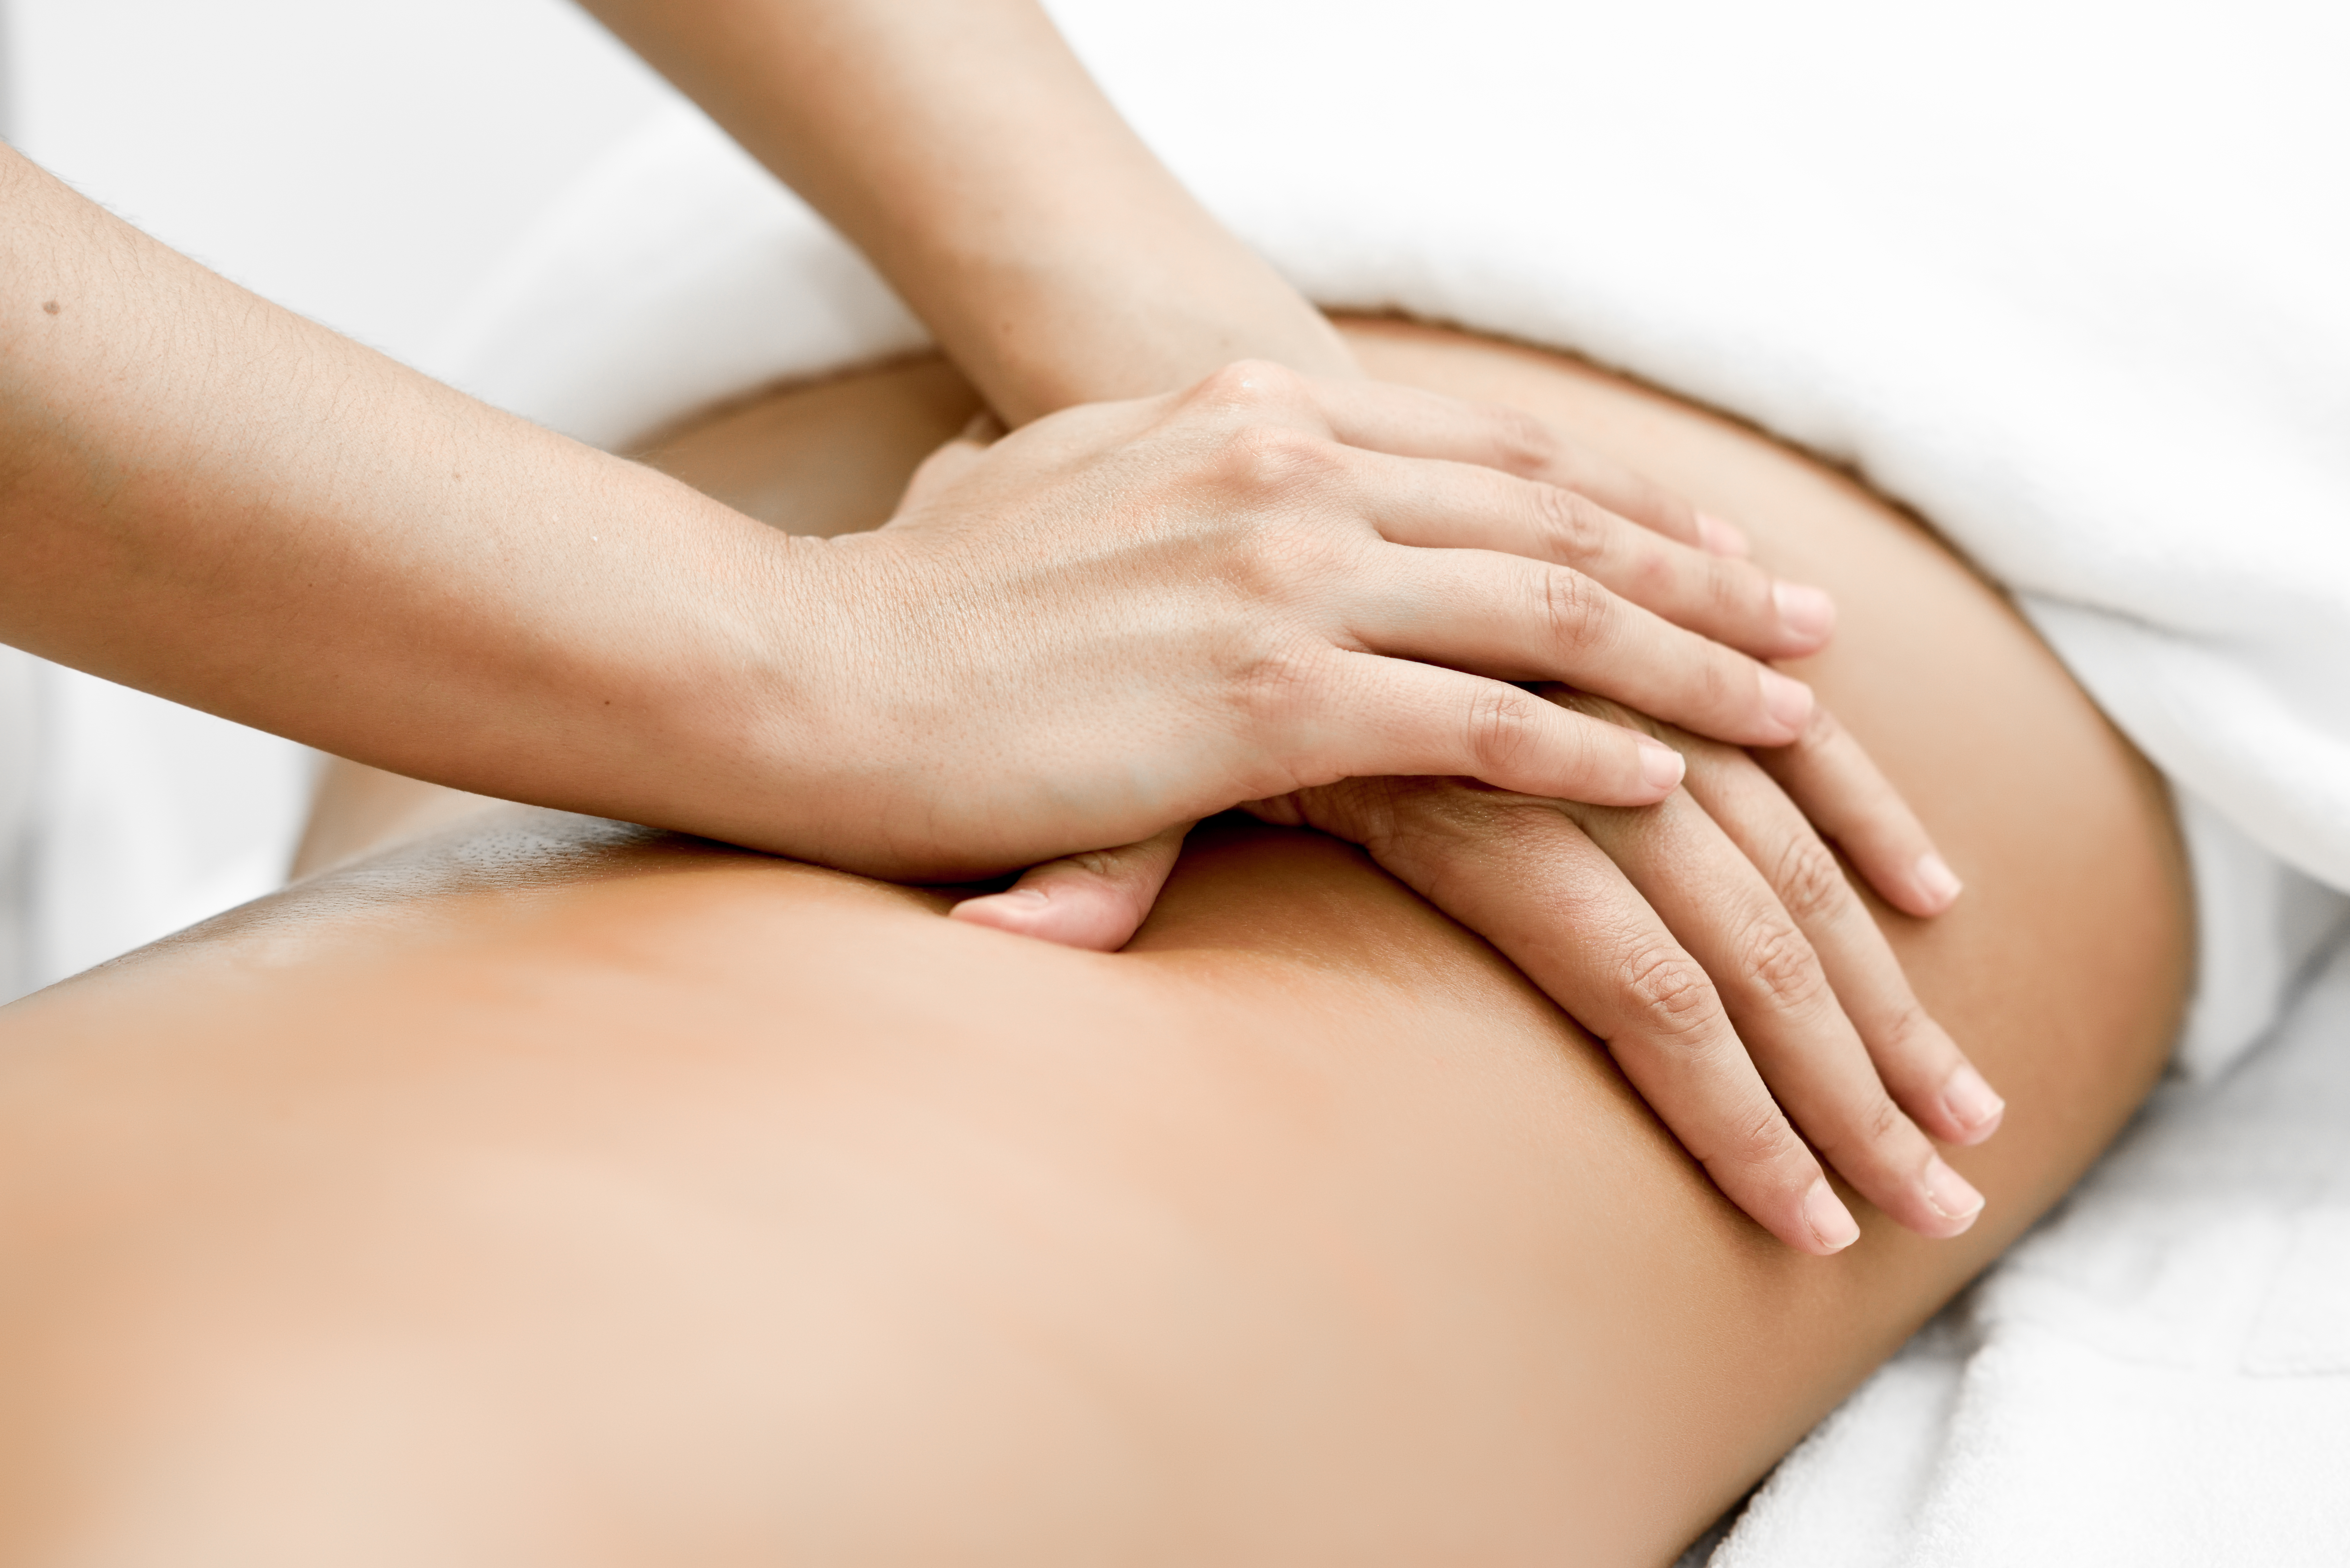 What Your Massage Therapist Wants You To Know Before A Massage